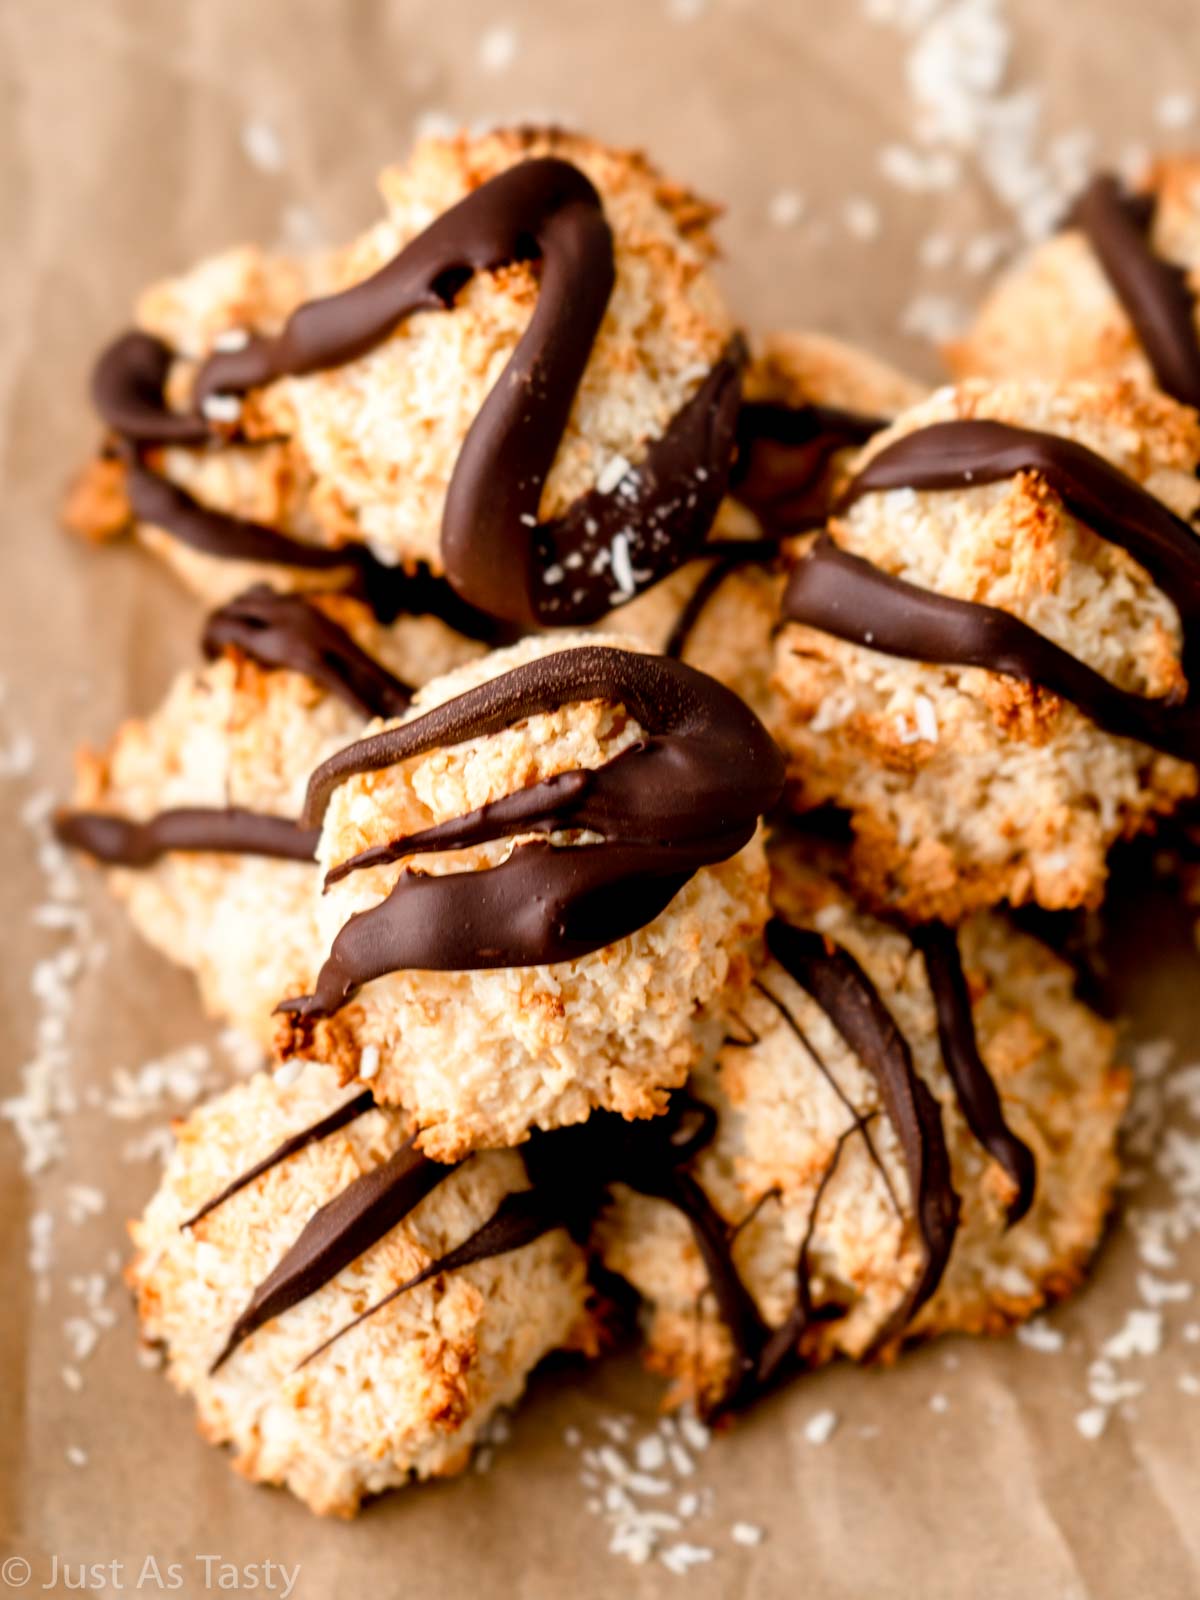 Pile of chocolate coconut macaroons on parchment paper.